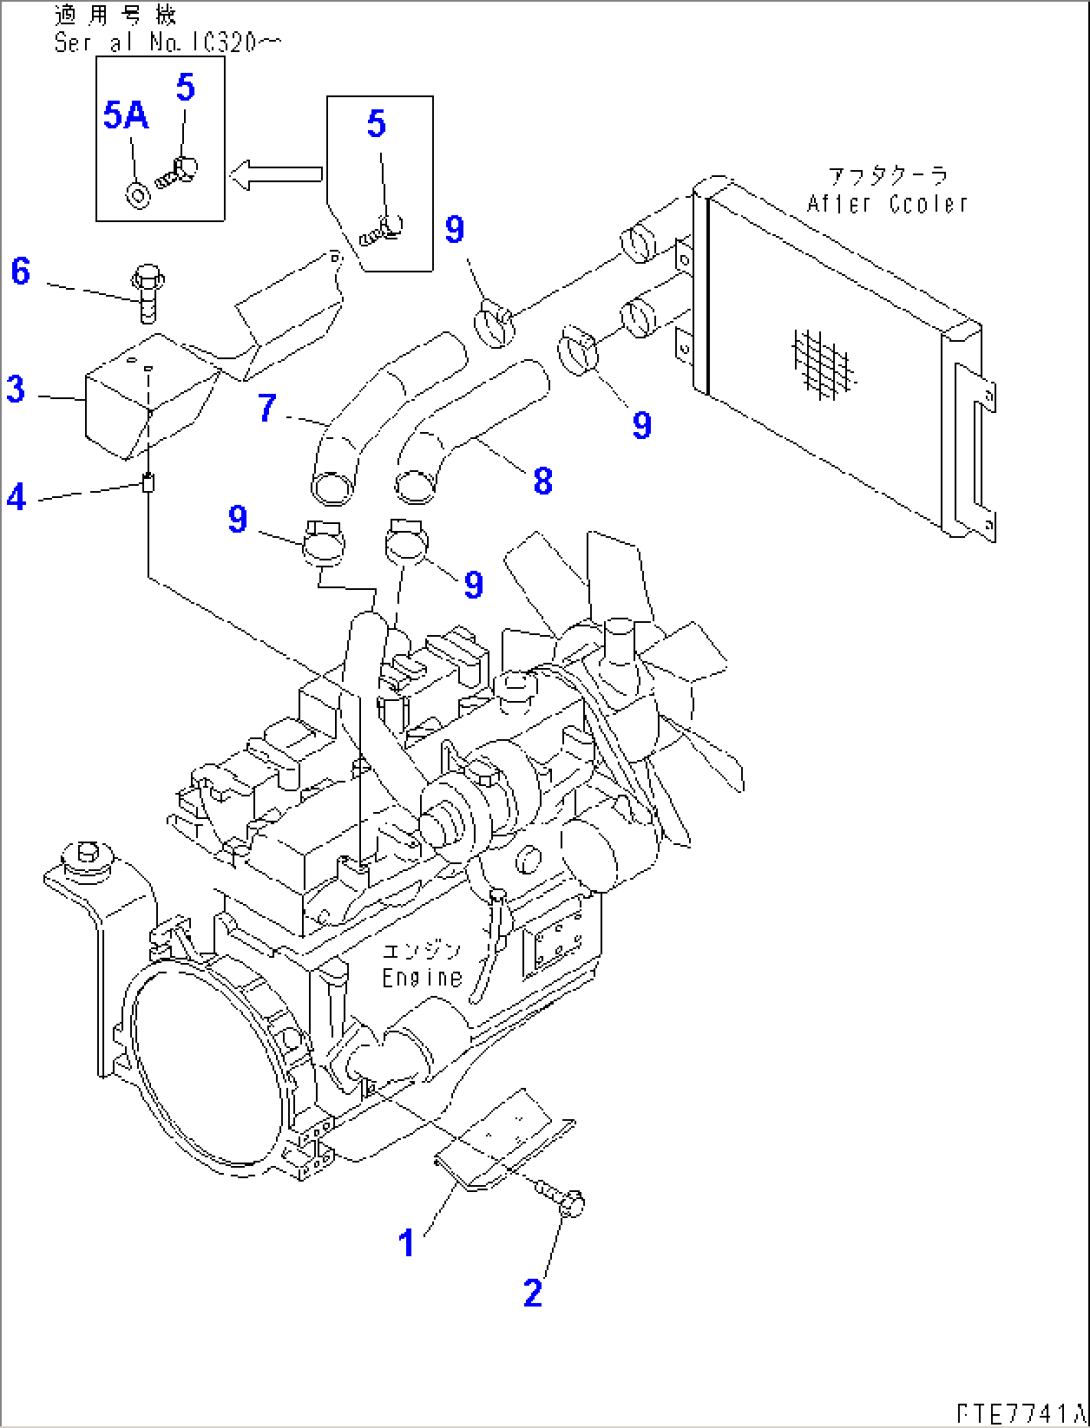 ENGINE (ENGINE AND COVER)(#10301-)